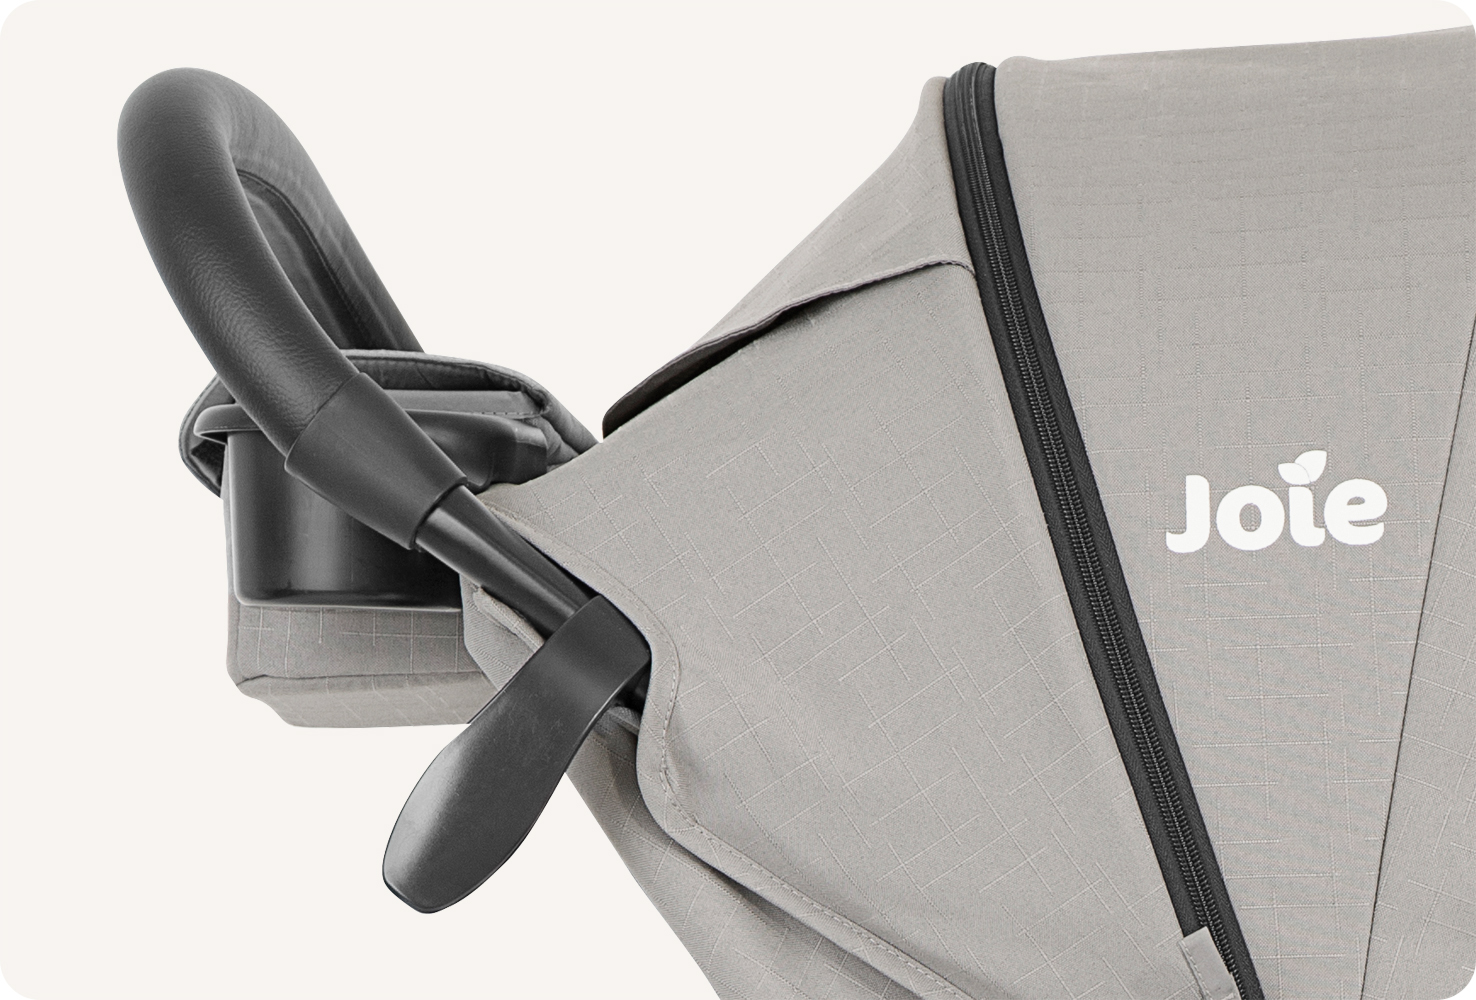  Joie litetrax pro air stroller in gray close-up of parent tray 